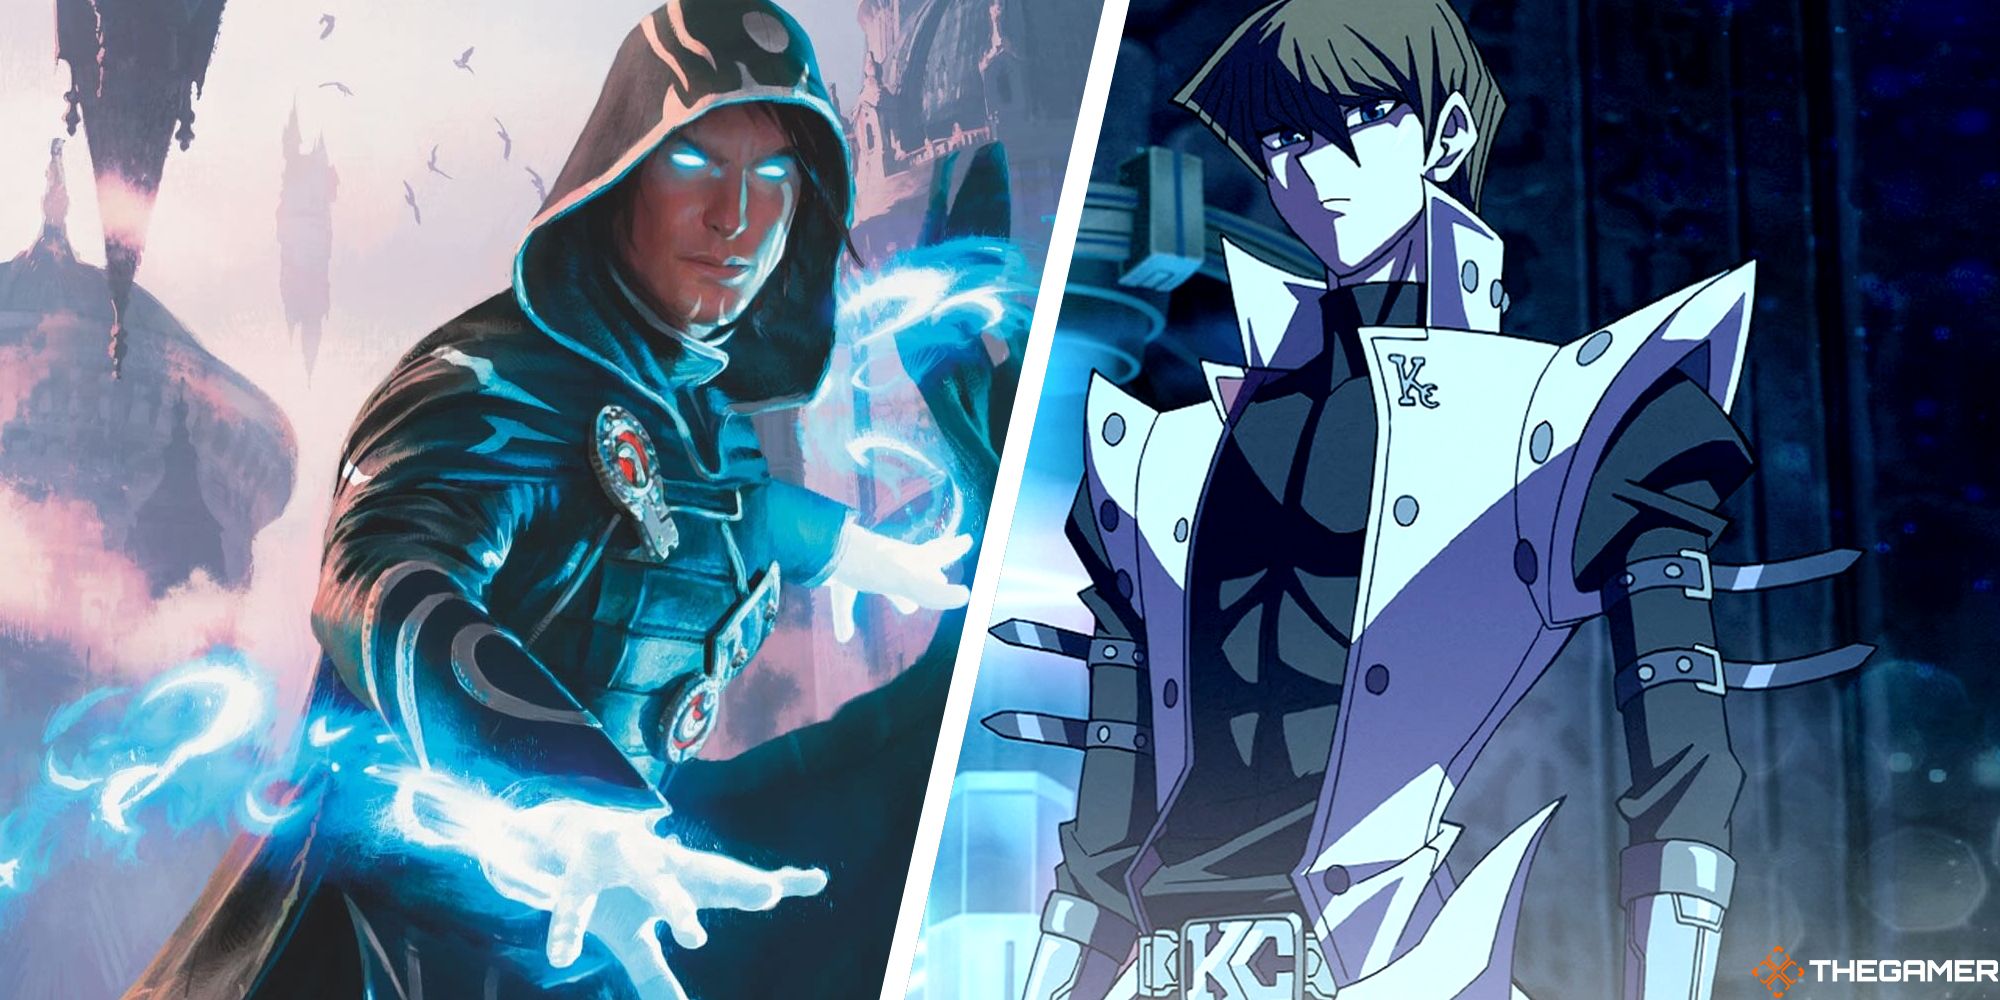 Magic: The Gathering And Yu-Gi-Oh! Face Off In YouTube Crossover Match